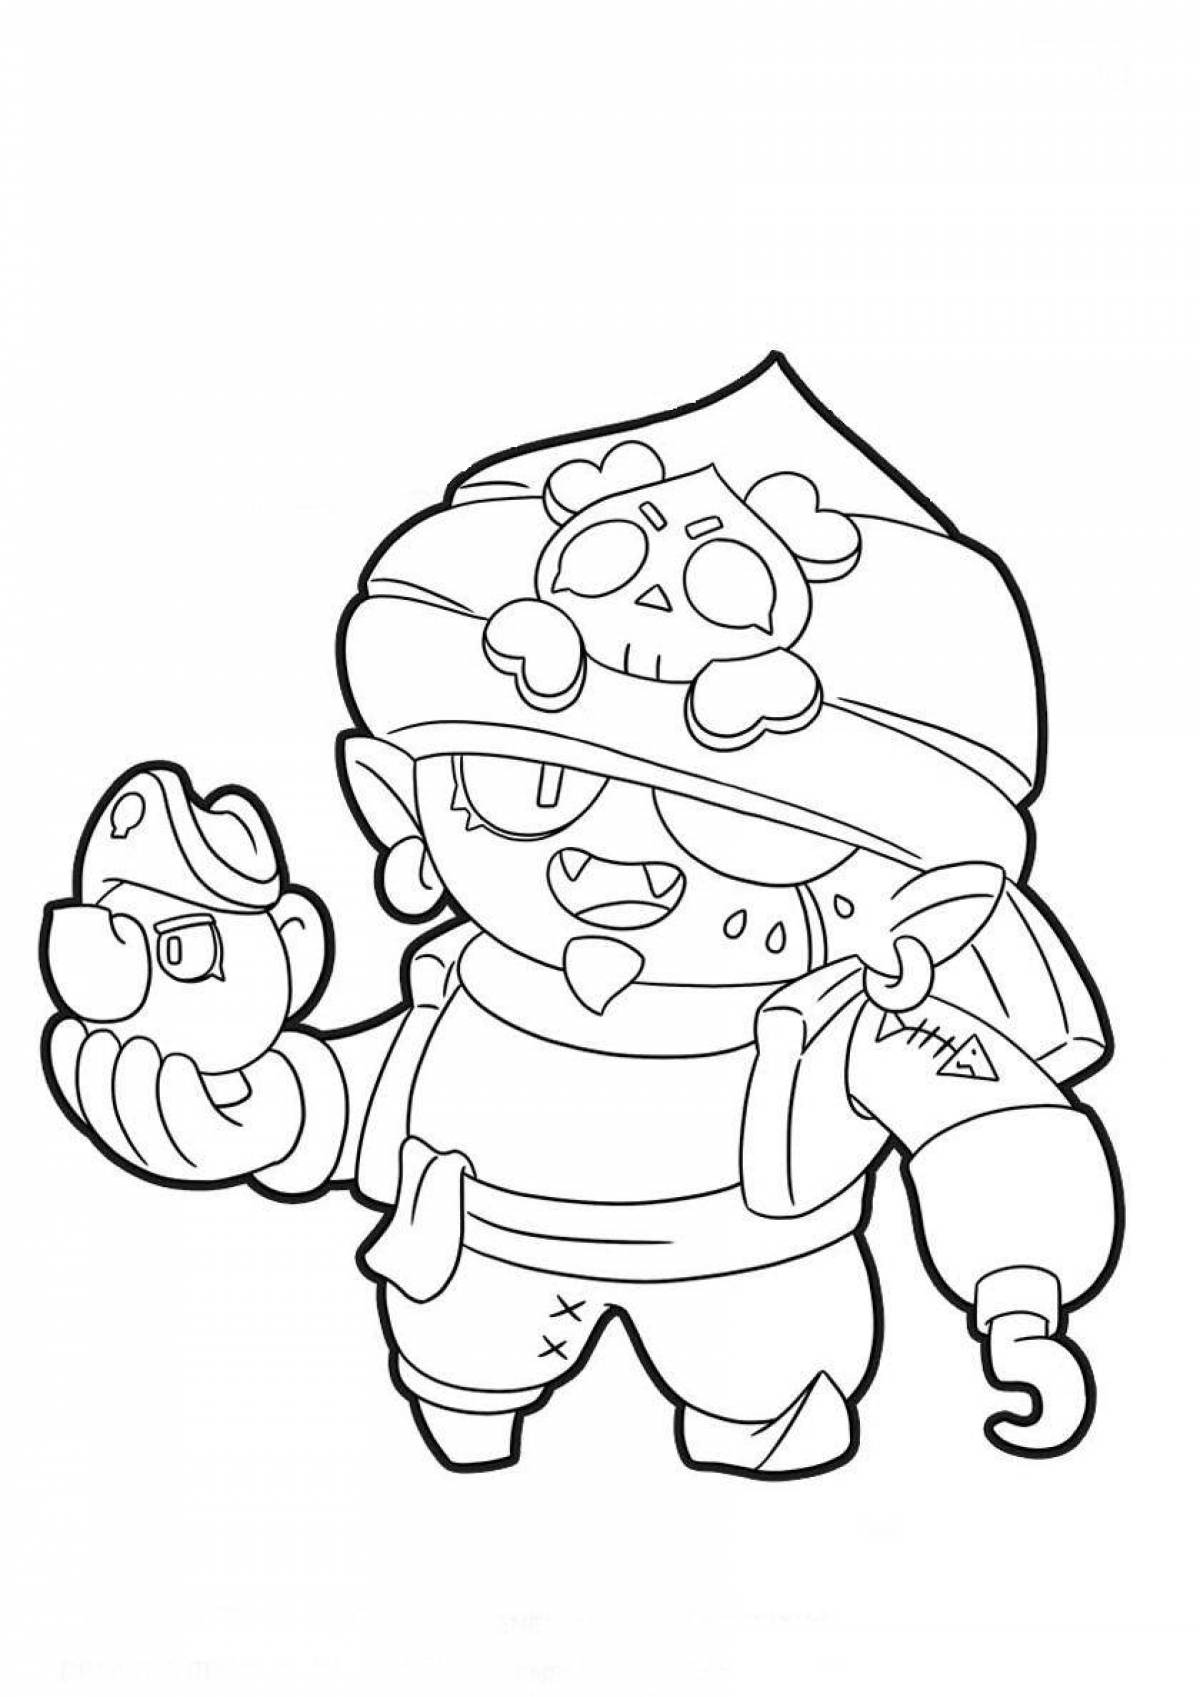 Exciting brawl stars coloring page